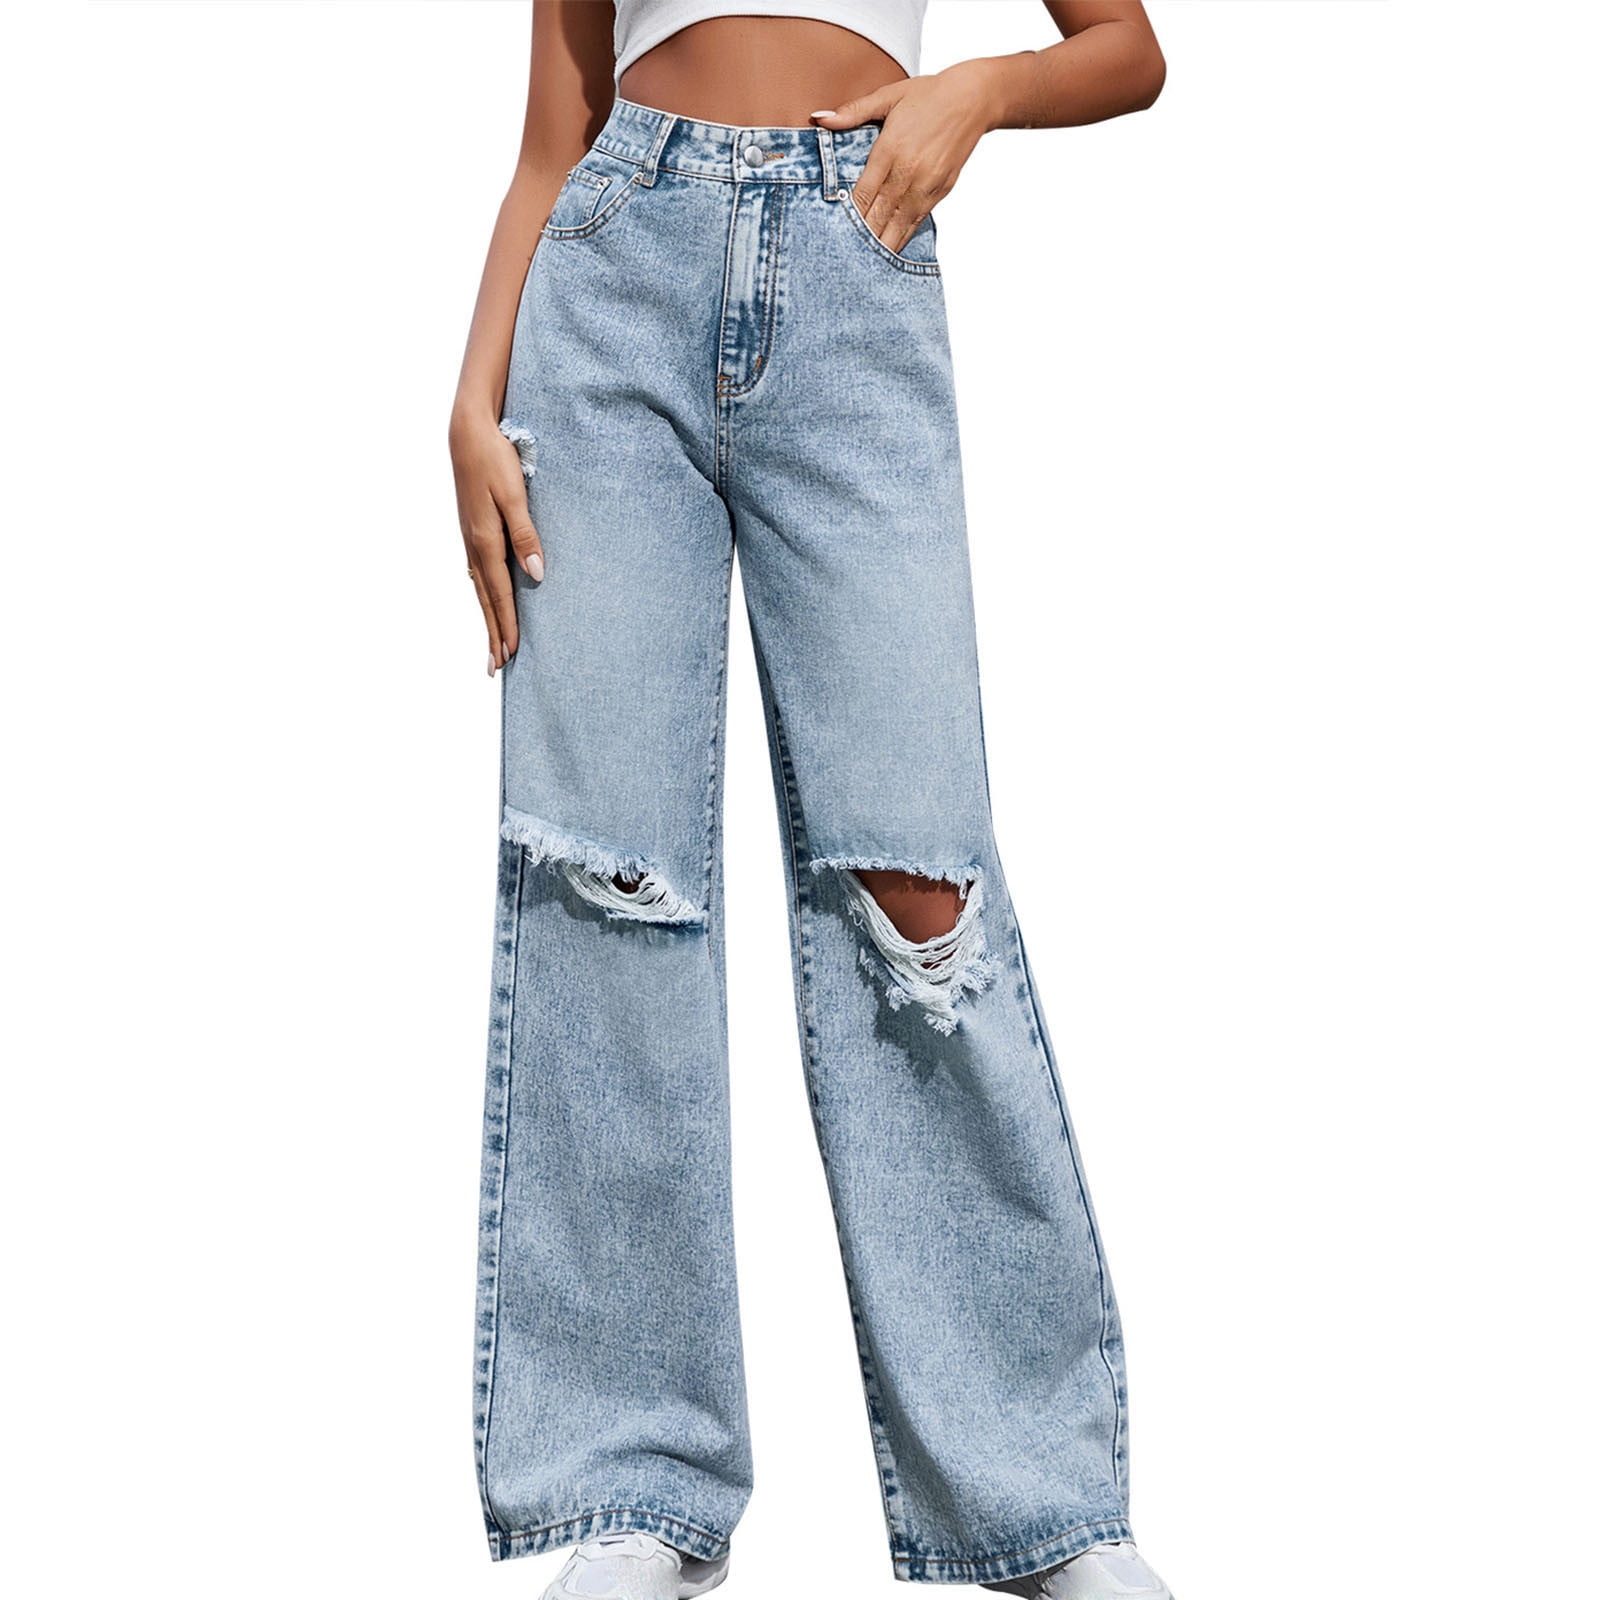 OGLCCG Women's High Waisted Ripped Jeans Distressed Straight Wide Leg Denim  Pants Fashion Loose Fit Trousers with Pockets and Hole 